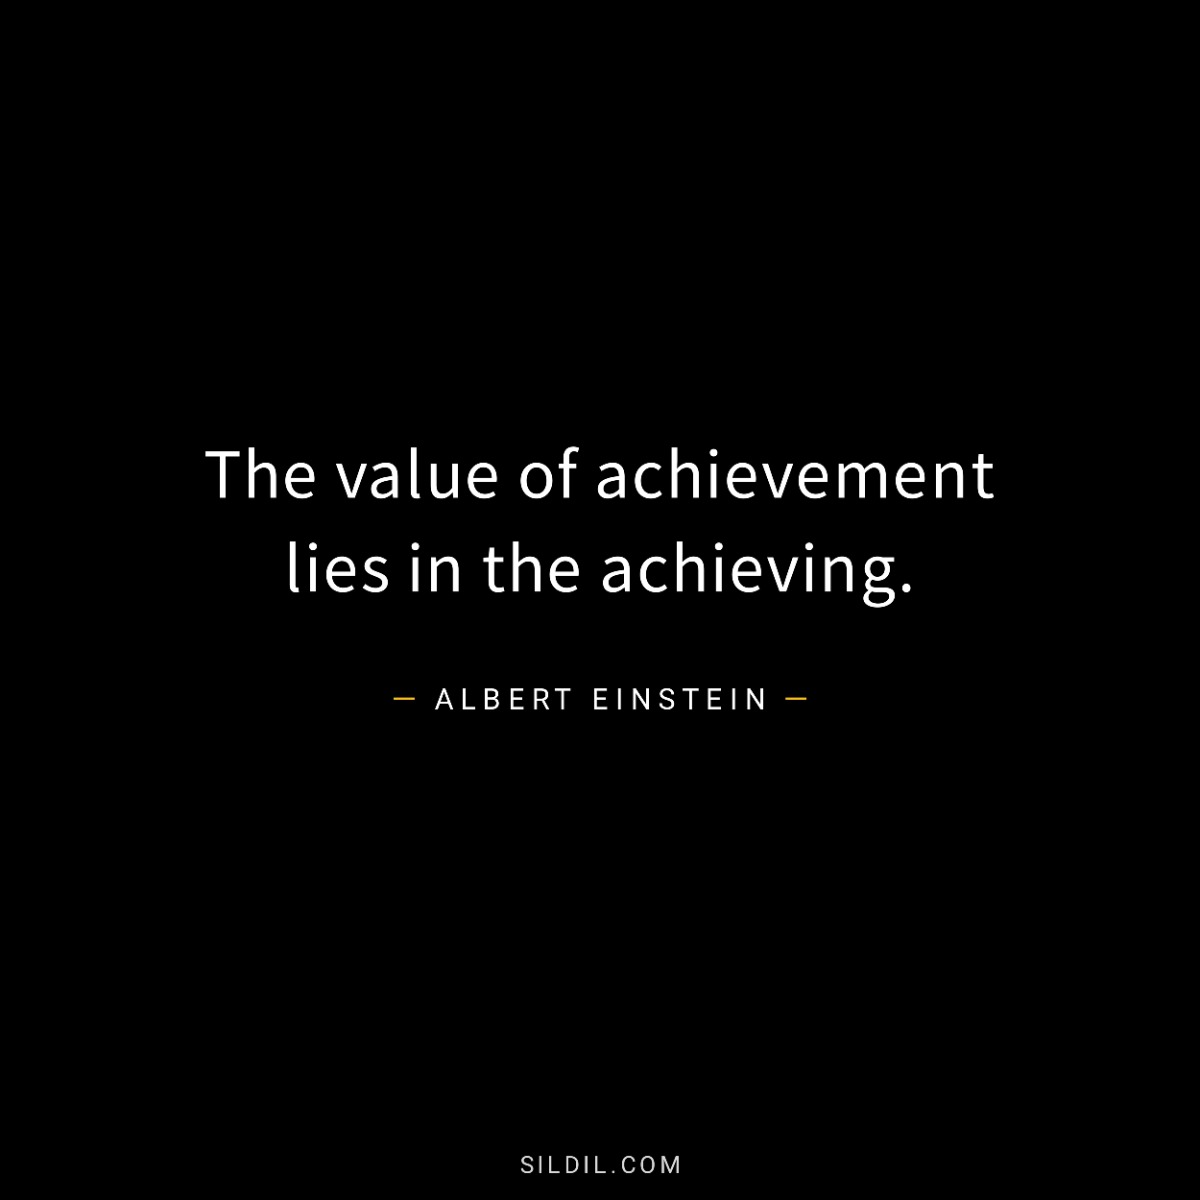 The value of achievement lies in the achieving.